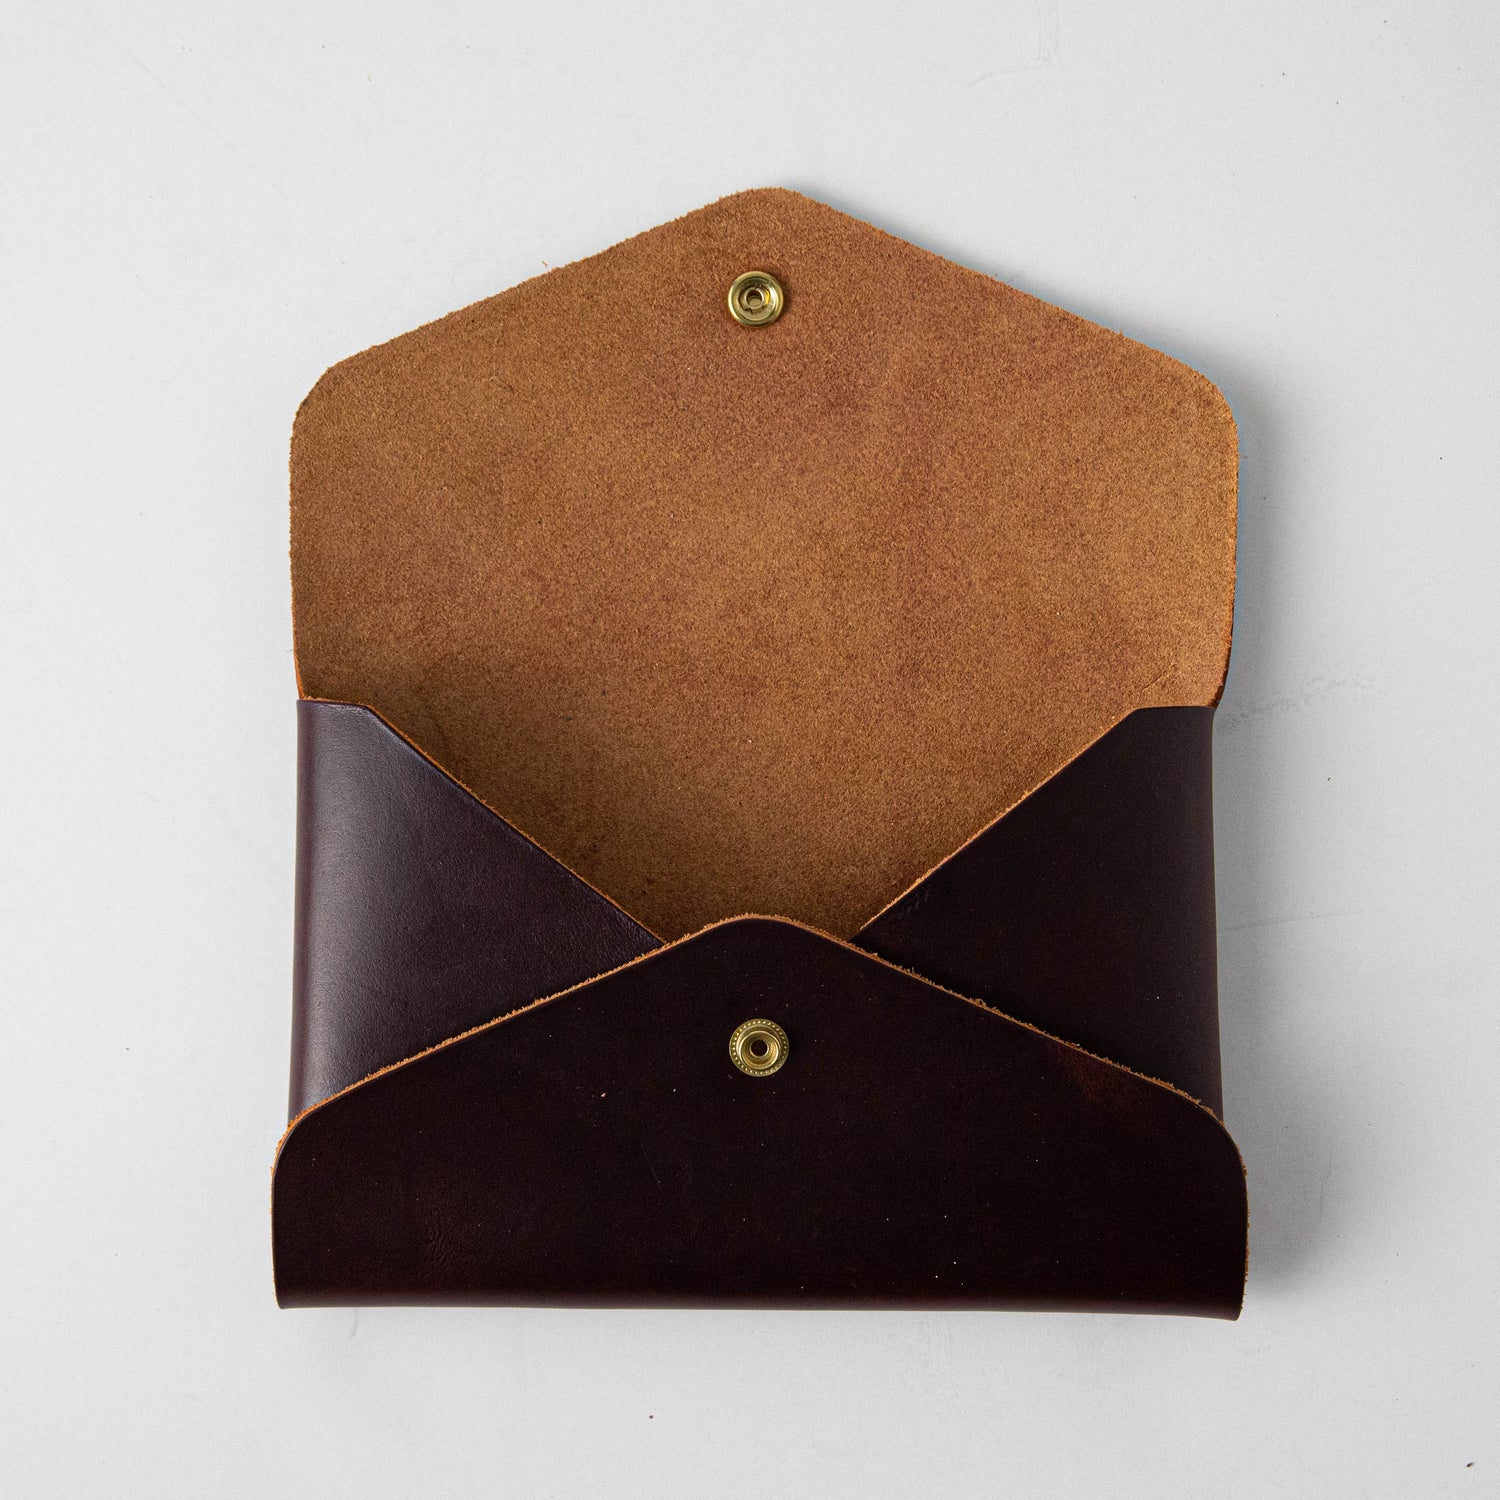 Leather Clutch Bag: Oxblood Envelope Clutch | Clutches by KMM & Co Yes